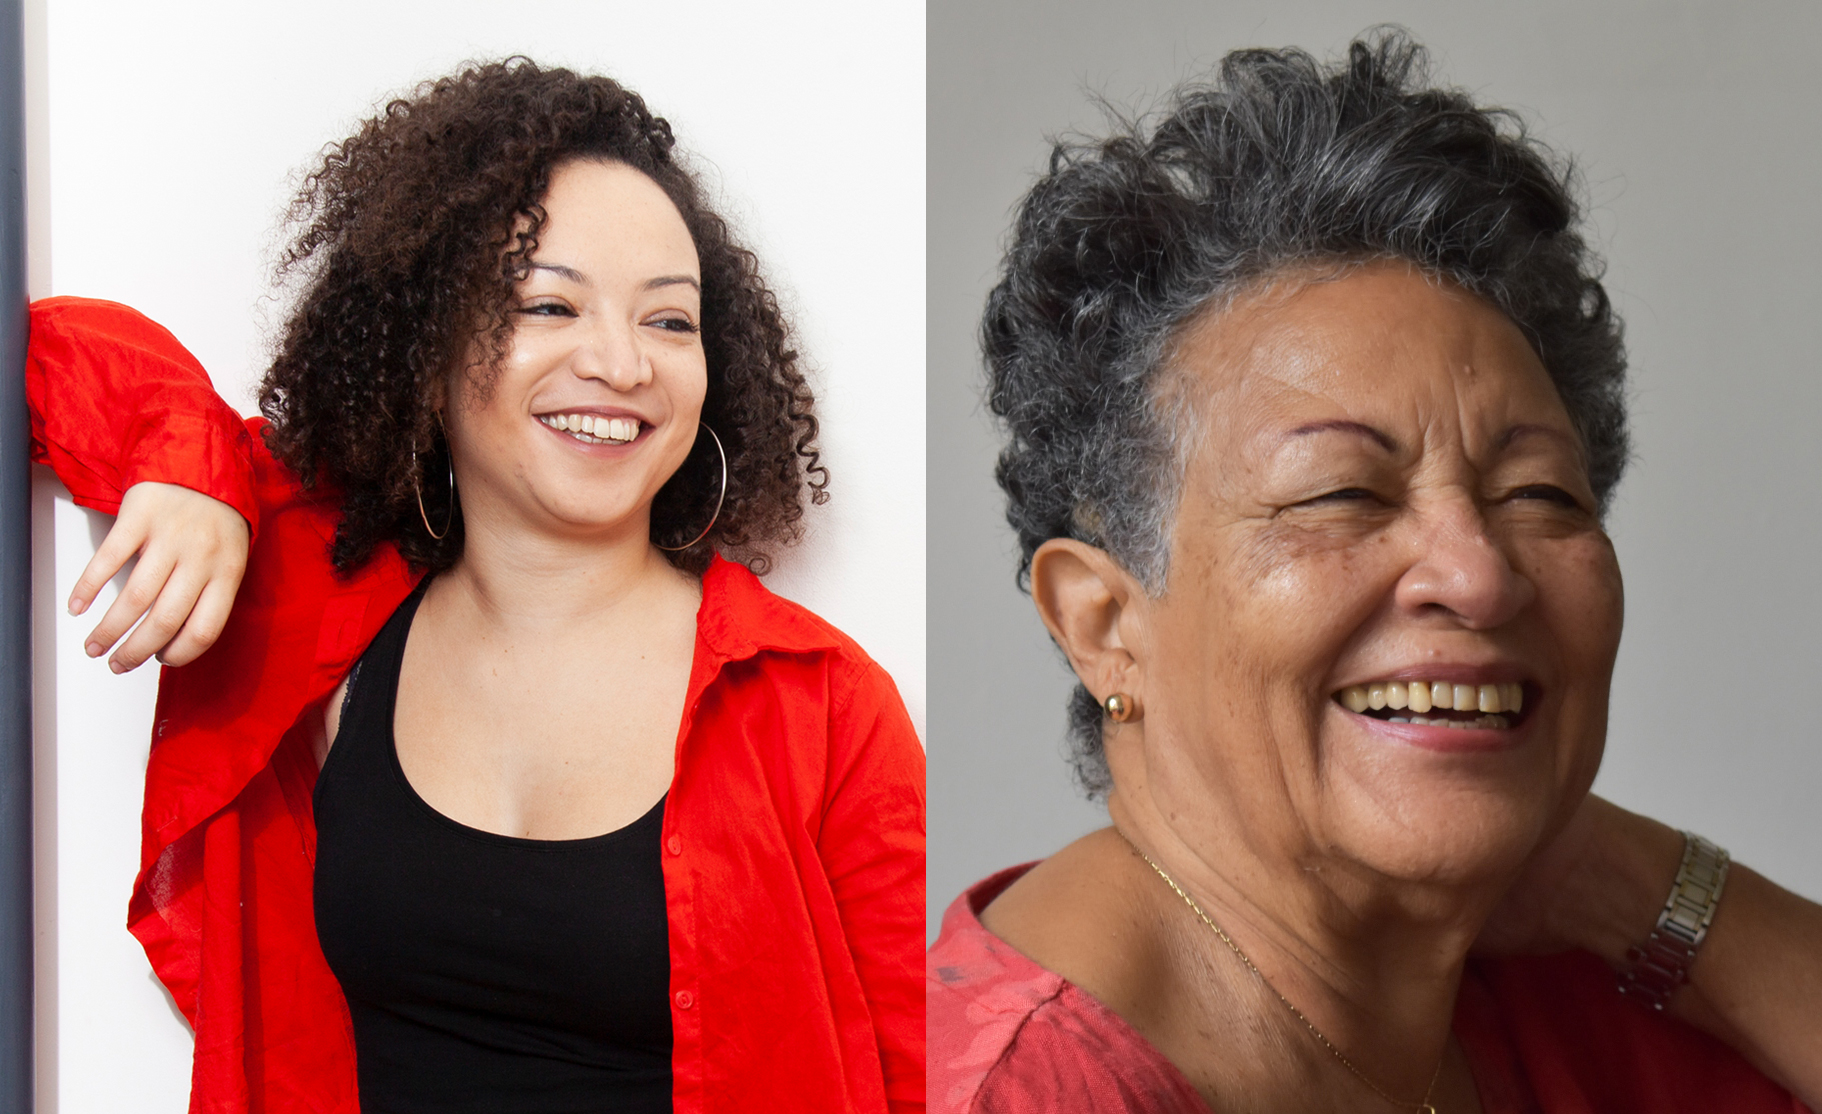 [left] Lynette Linton. Photo by Bronwen Sharp / [right] Yvonne Brewster OBE by Mike Fulford